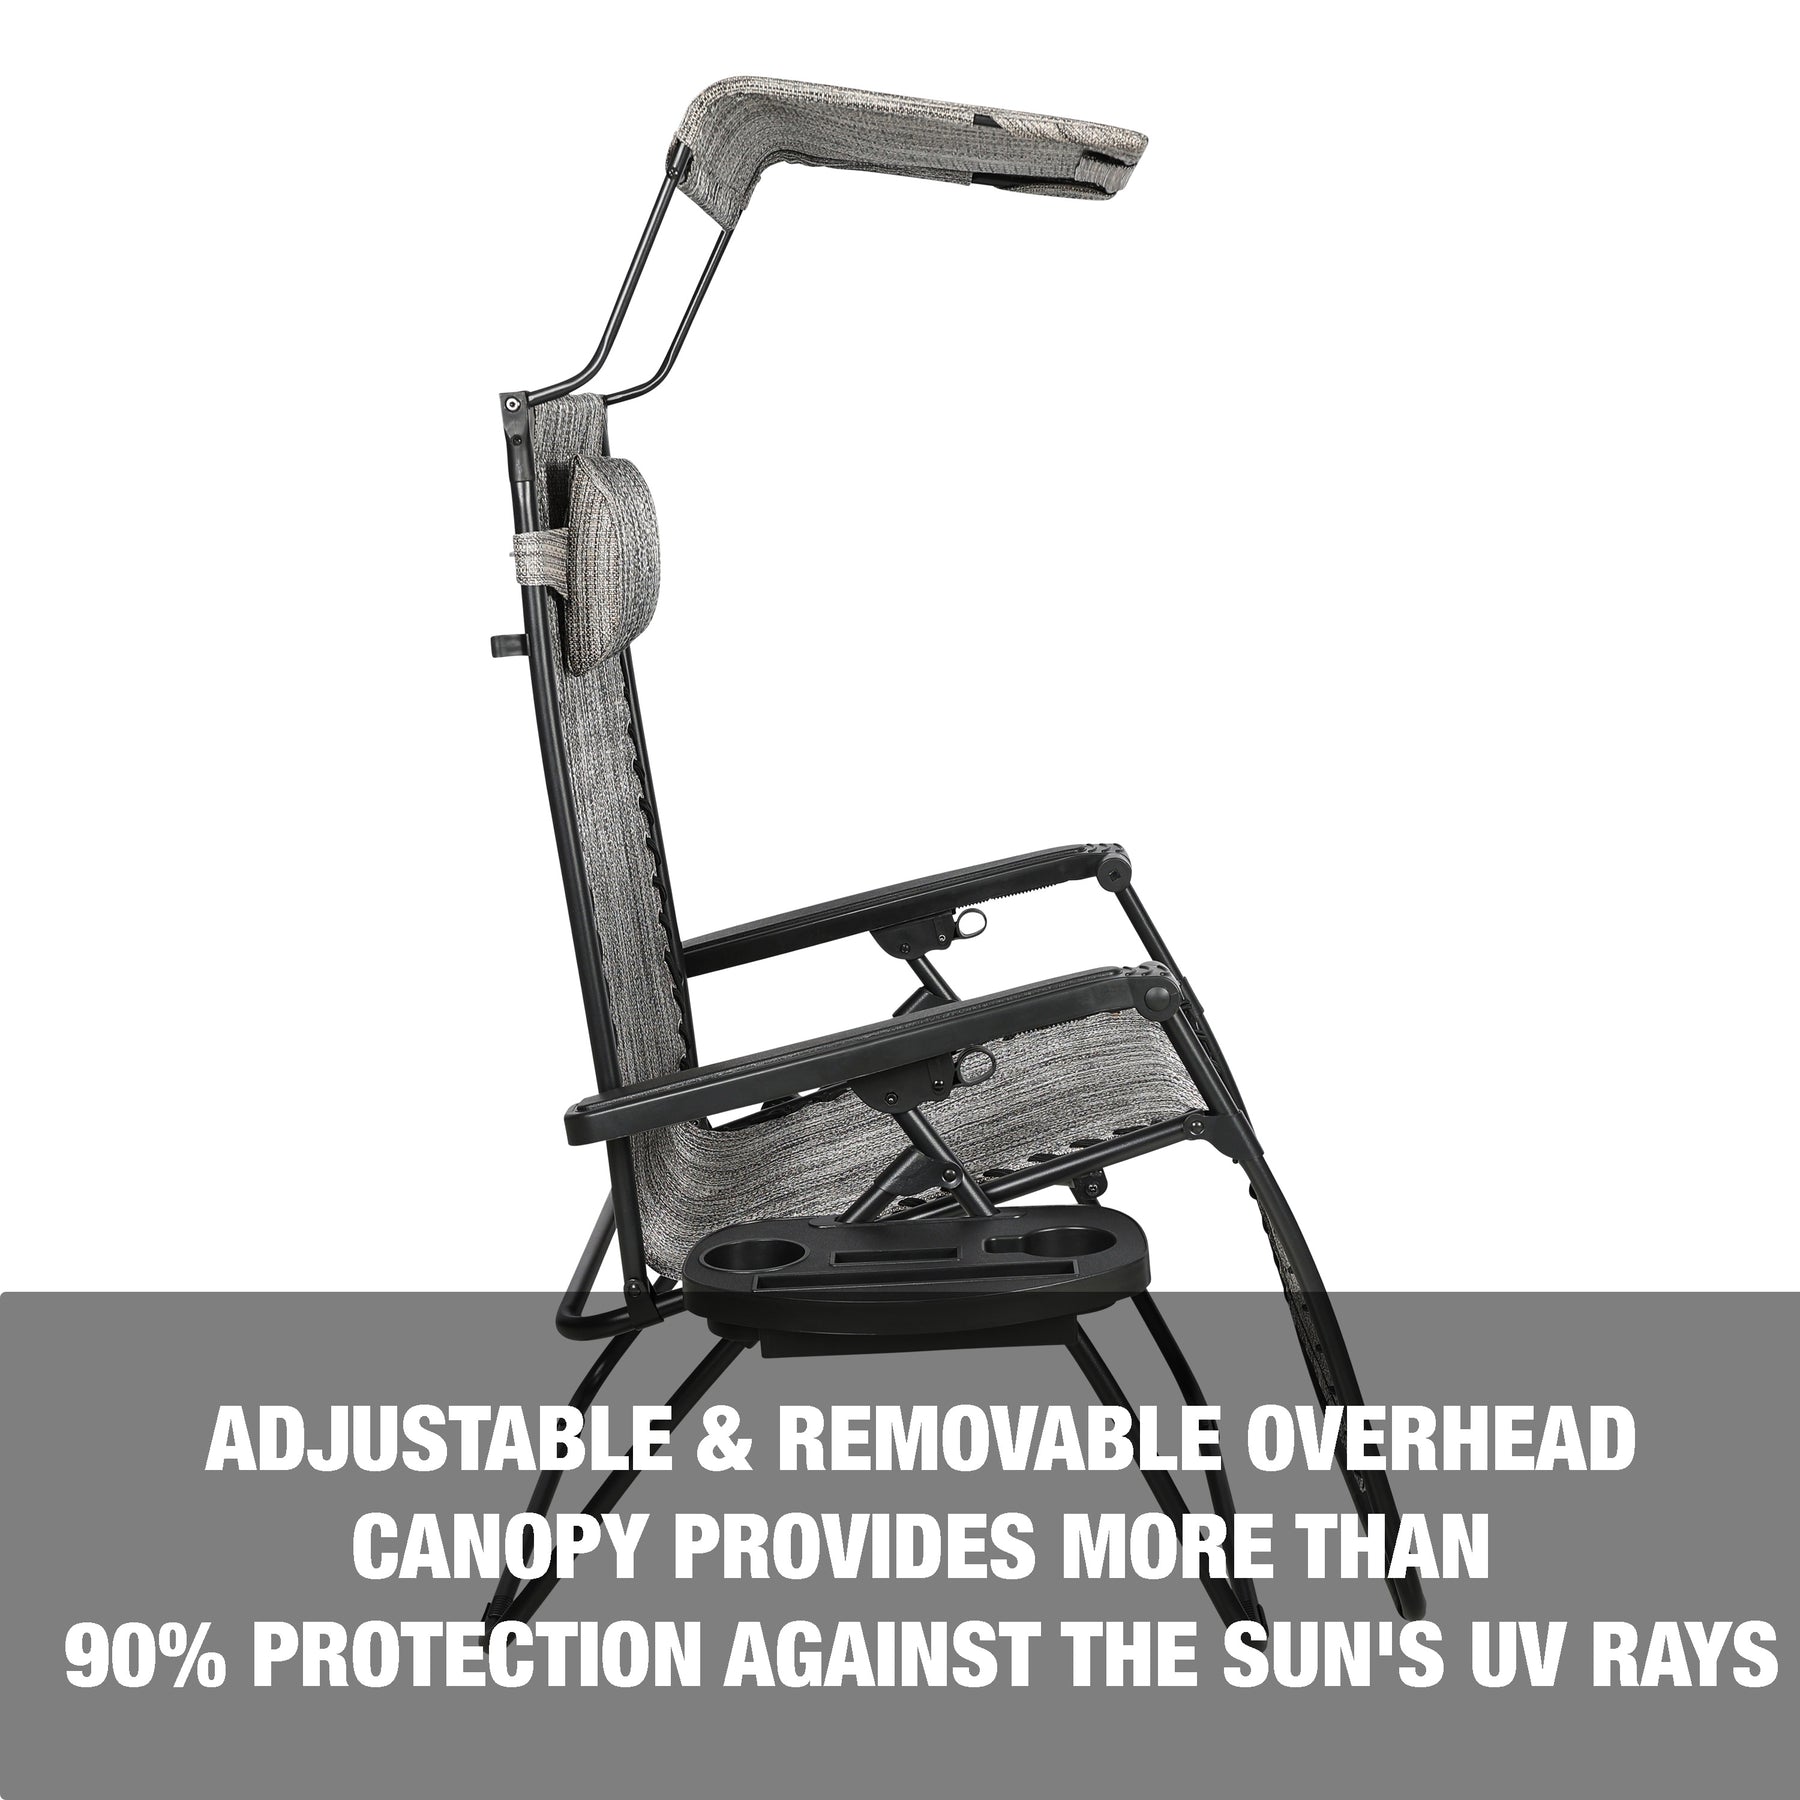 Adjustable and removable overhead canopy provides more than 90% protection against the Sun's UV rays.